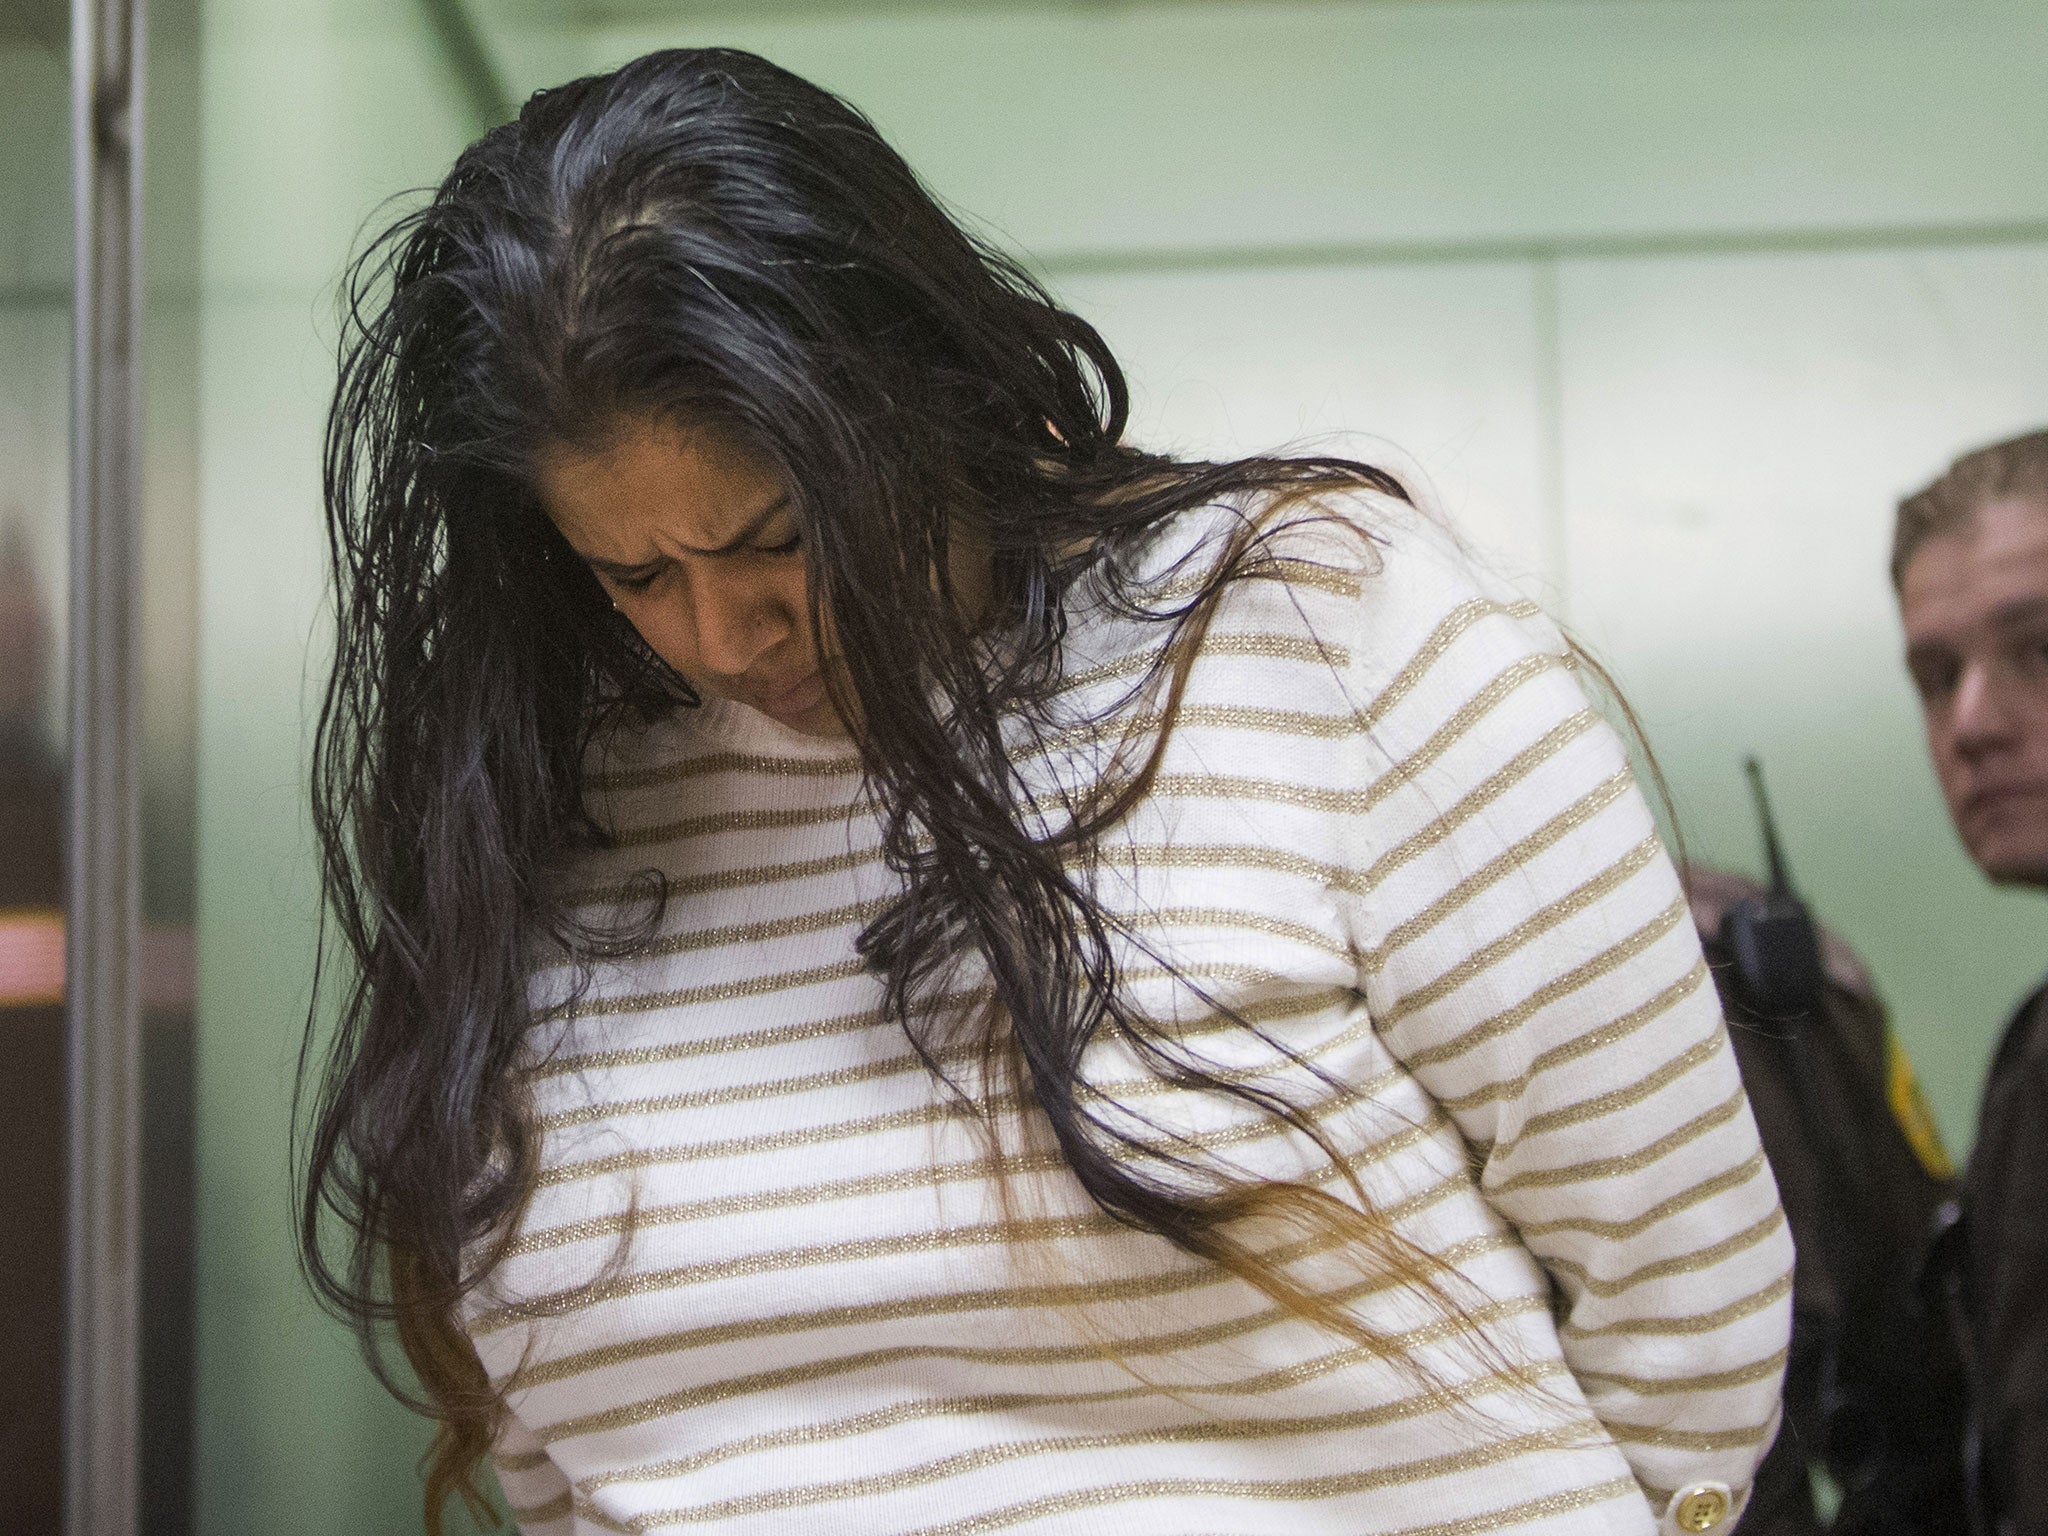 Purvi Patel is taken into custody after being sentenced to 20 years in prison for feticide and neglect of a dependent